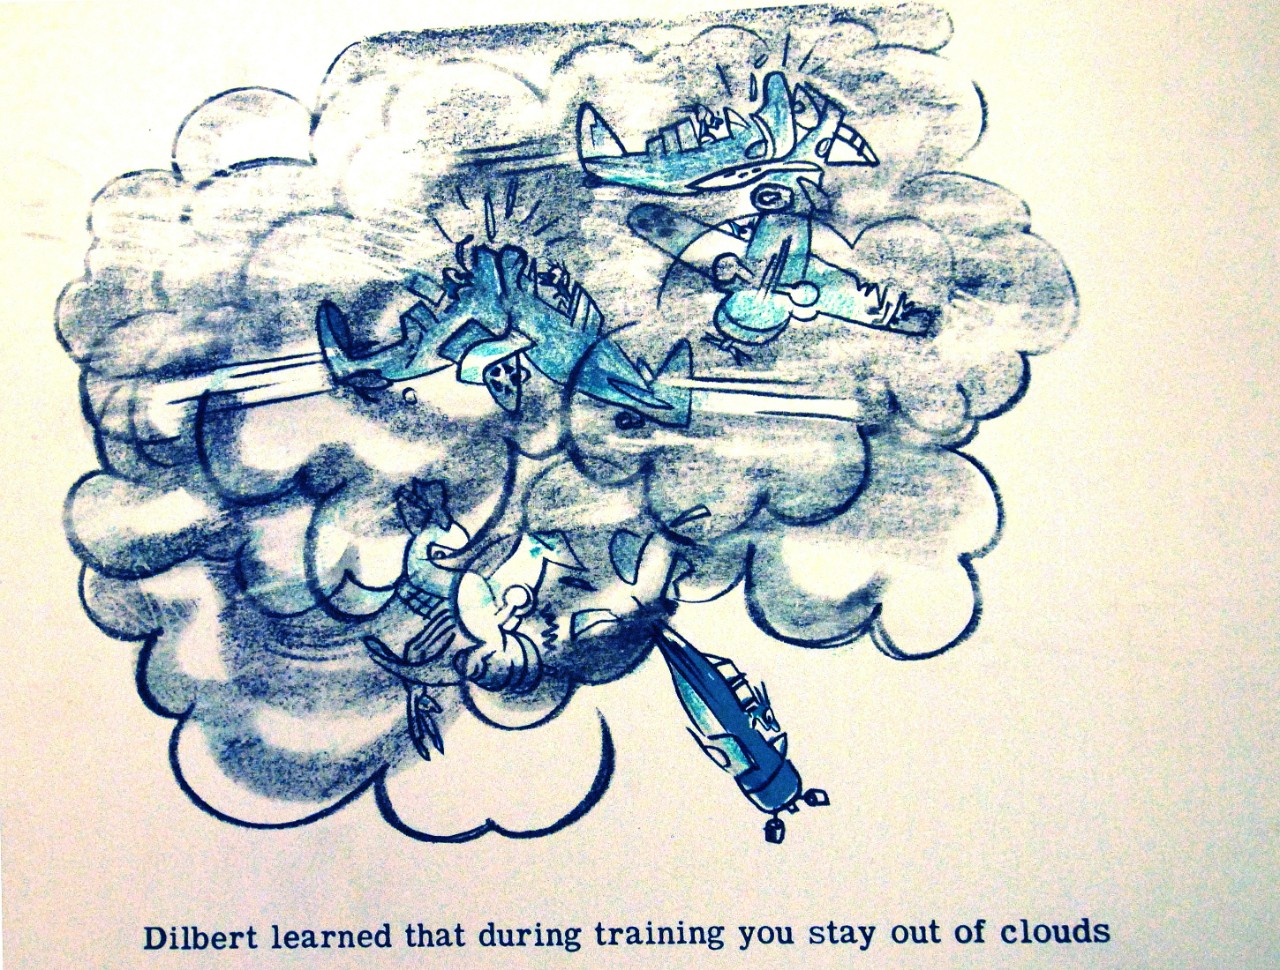 LC-Lot 8088-5: U.S. Naval Aviation Training Aids by U.S. Navy Training Division, circa 1943. Slide 246: “Dilbert learned that during training you stay out of the clouds.” Artwork by Lieutenant Commander Robert C. Osborn, USNR. Courtesy of the Lib...